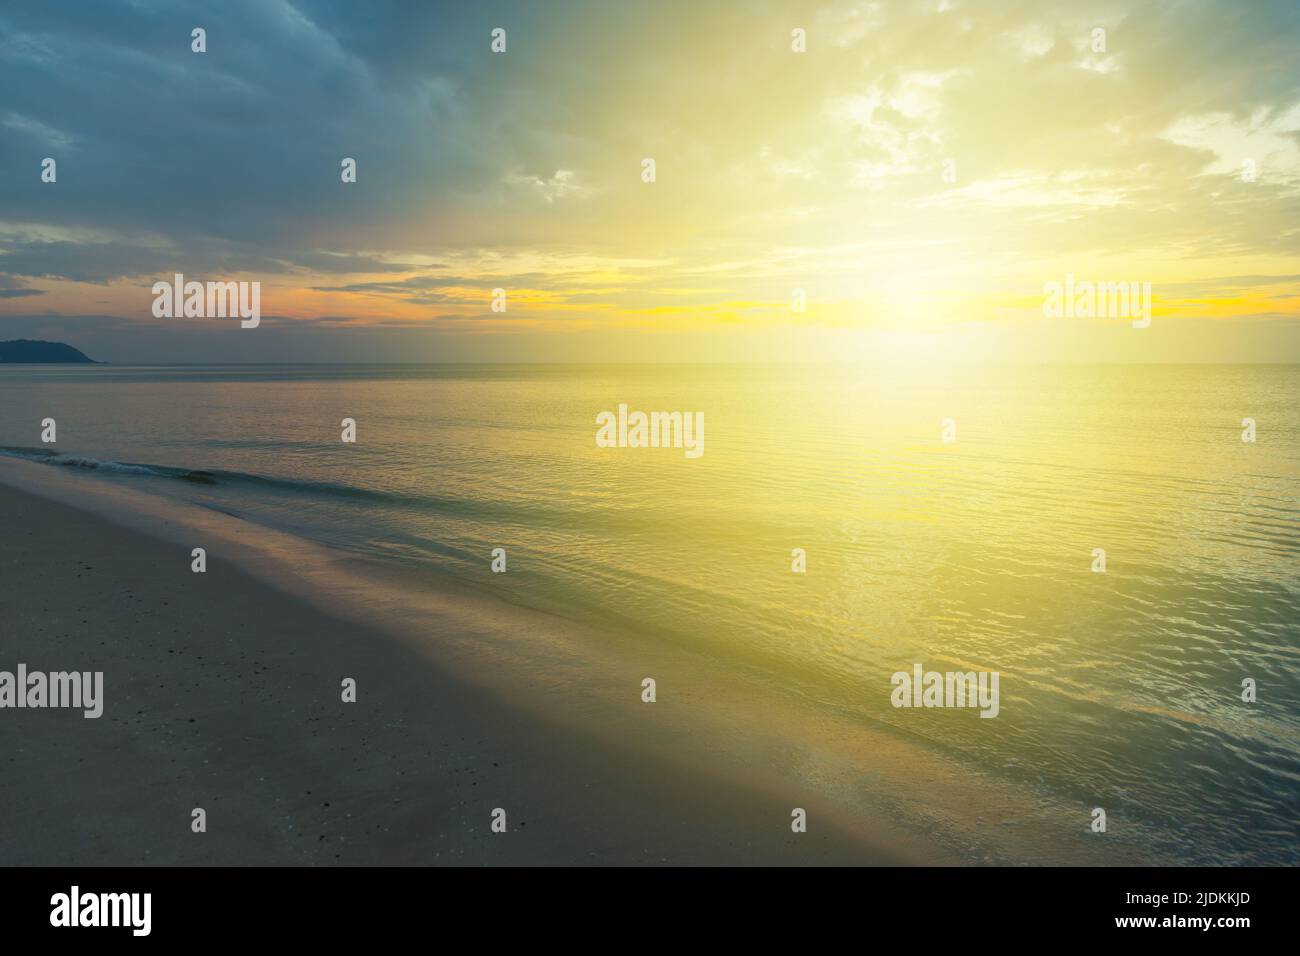 Siluette sunset at the beach background Stock Photo